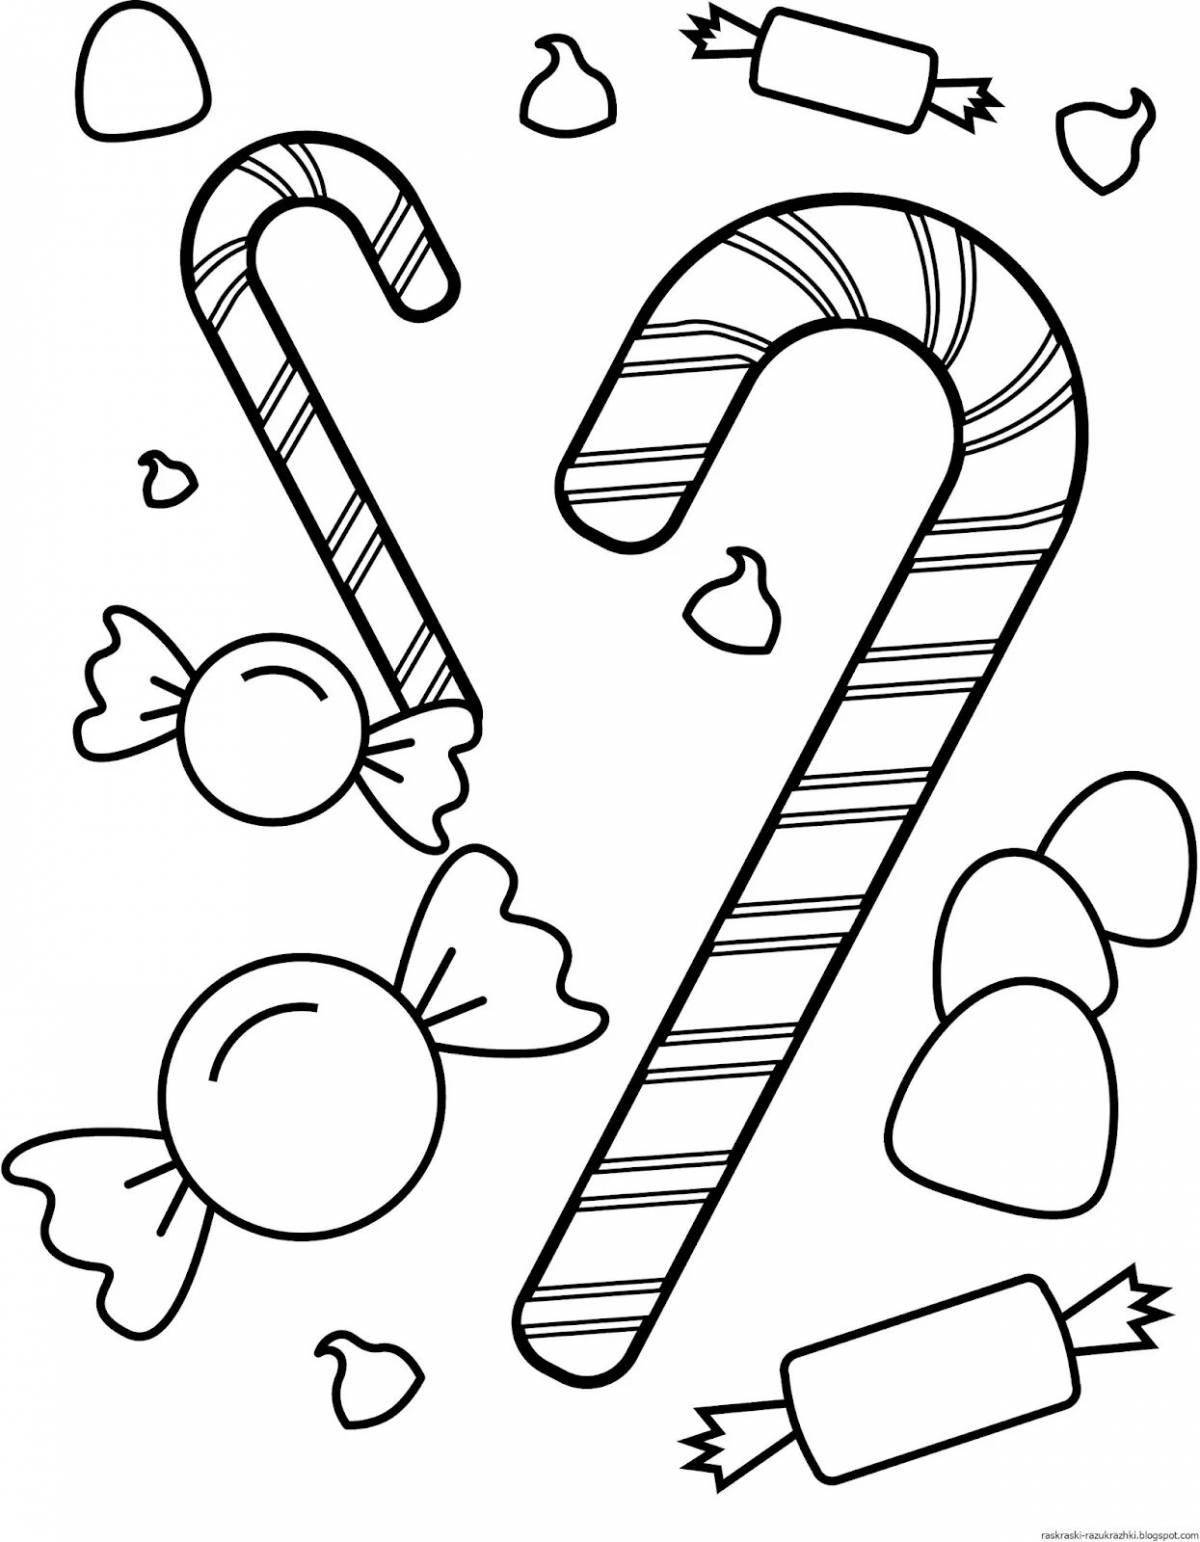 Glowing candy coloring page